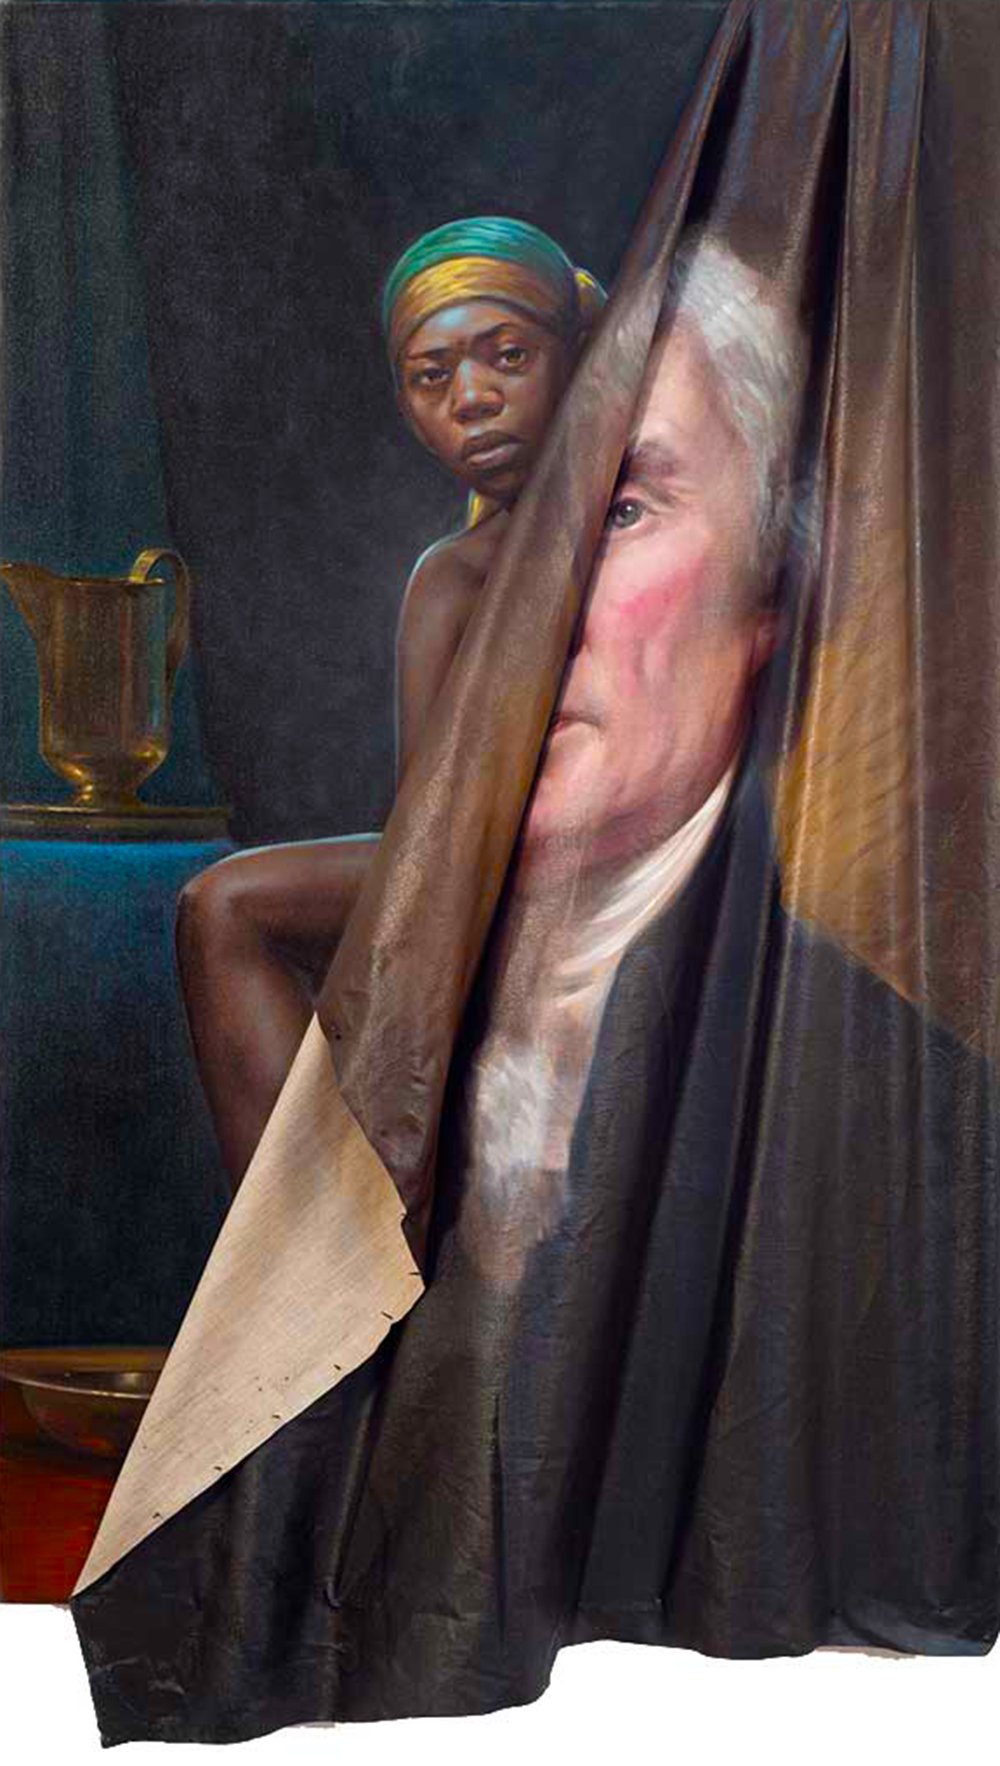 The artwork reimagines an iconic Thomas Jefferson portrait, "peeling" it back to unveil a hidden portrait of an enslaved black woman. Emerging from behind the folded canvas, she stands out with a vivid green headscarf with a gold band and a golden pitcher, set against a dim, shadowy backdrop.